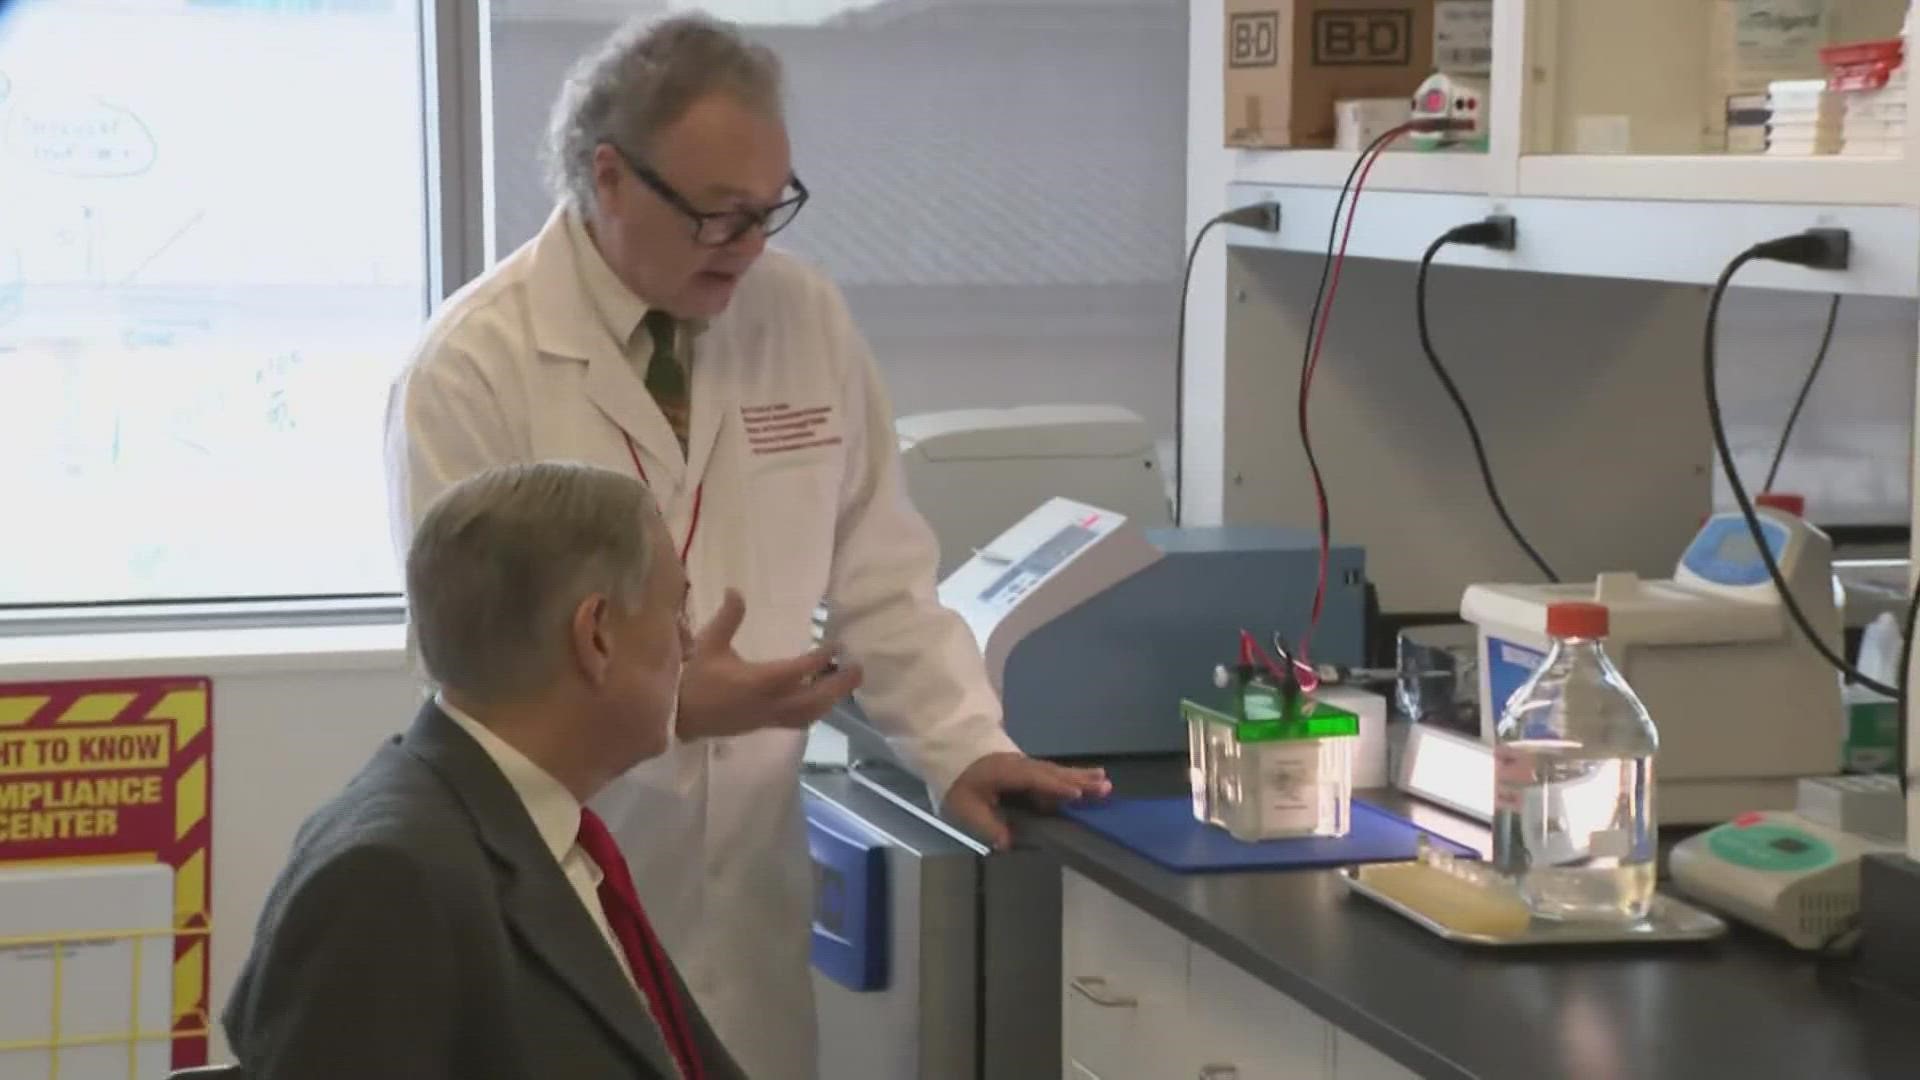 The University of Houston has developed the new medicine that Governor Abbott believes will save lives.